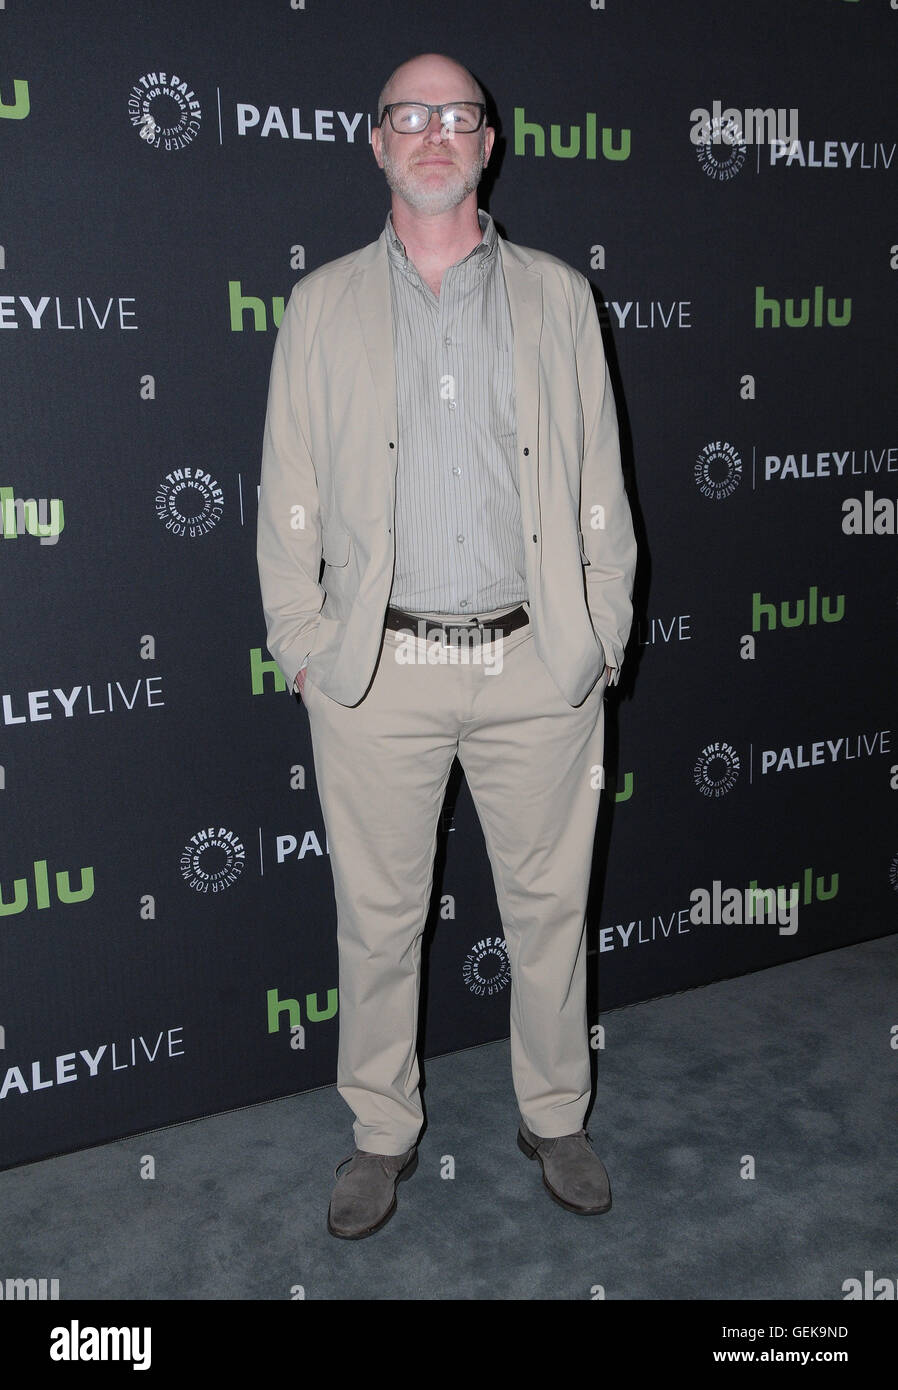 Beverly Hills, CA, USA. 26th July, 2016. 26 July 2016 - Beverly Hills, California. David Hollander. The Paley Center for Media presents PaleyLive LA: An Evening With Ray Donovan held at the Paley Center for Media. Photo Credit: Birdie Thompson/AdMedia Credit:  Birdie Thompson/AdMedia/ZUMA Wire/Alamy Live News Stock Photo